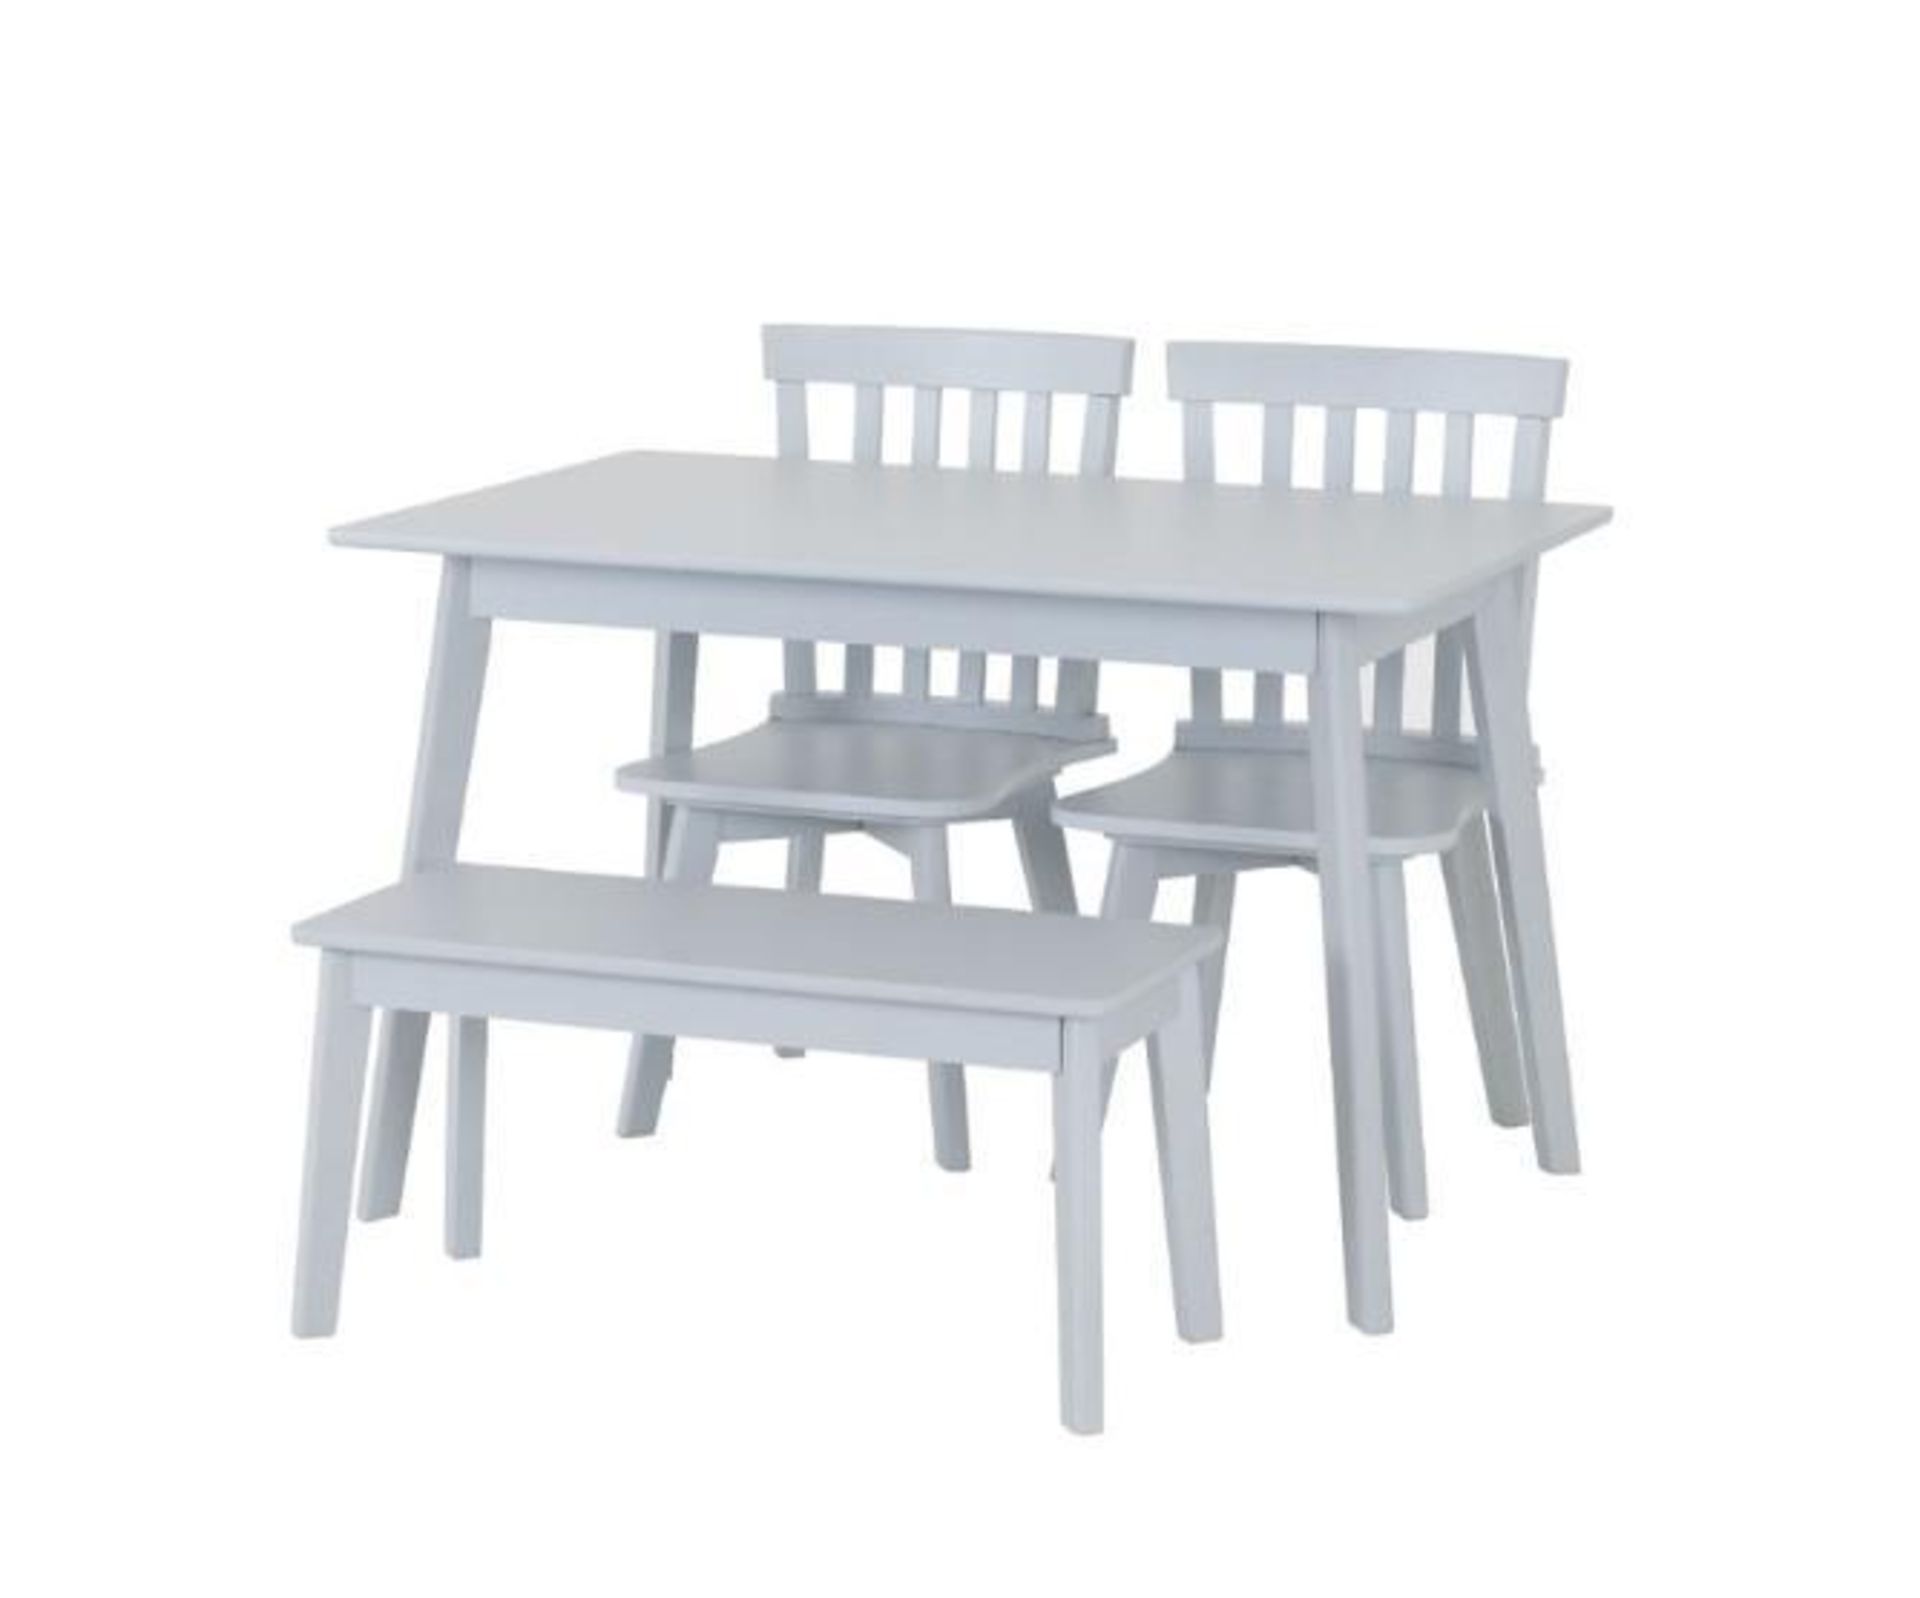 *EX DISPLAY* Matlock grey wooden 4 seater dining set with bench. RRP: £279.99.00 - Image 2 of 2